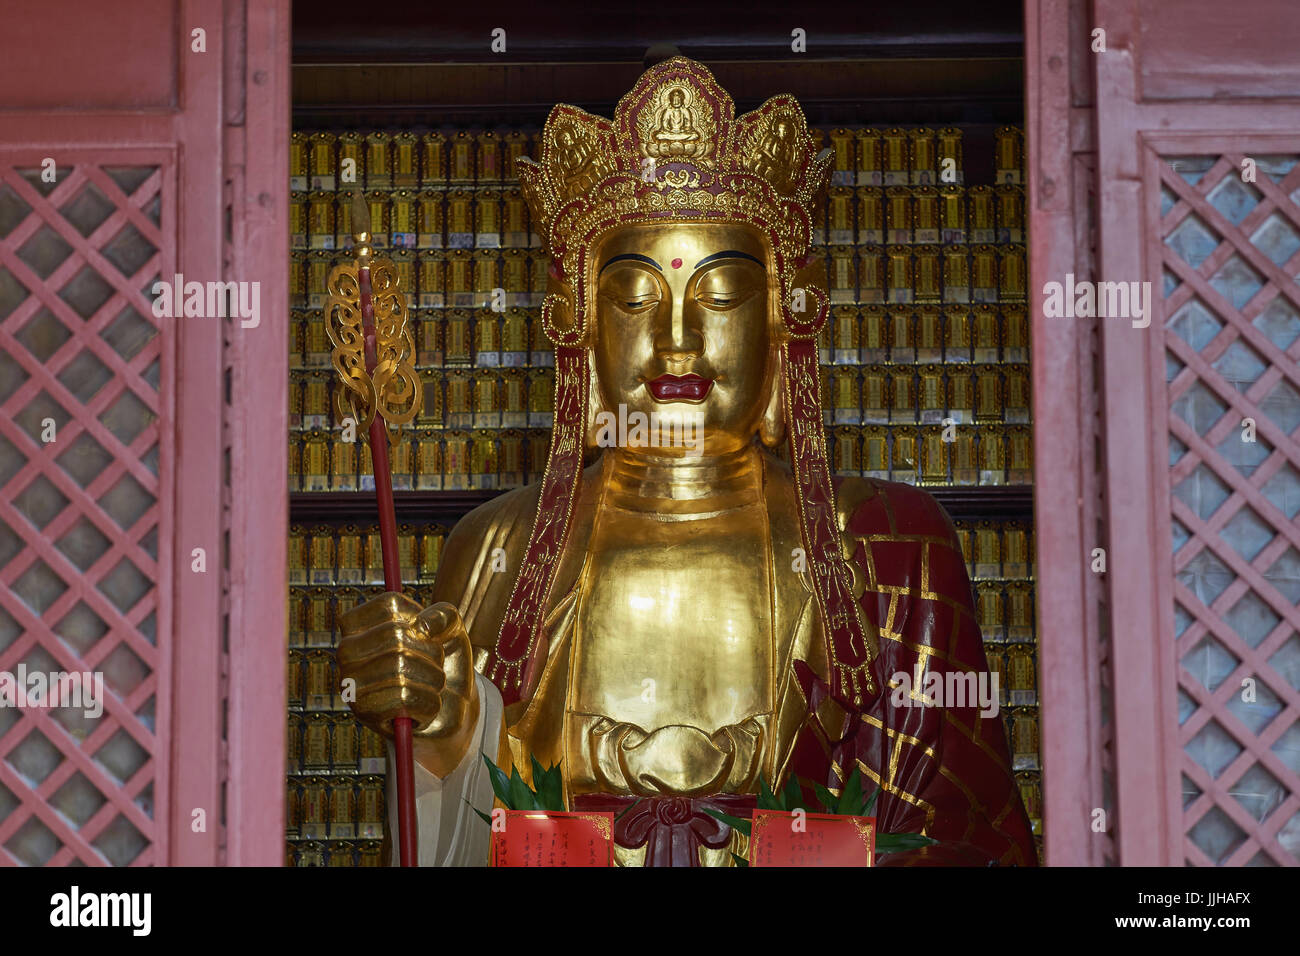 Closeup of Golden Buddha statue in Dafo Temple (also Big Buddha Temple), one of Guangzhou's most popular temples - Guangzhou, China Stock Photo